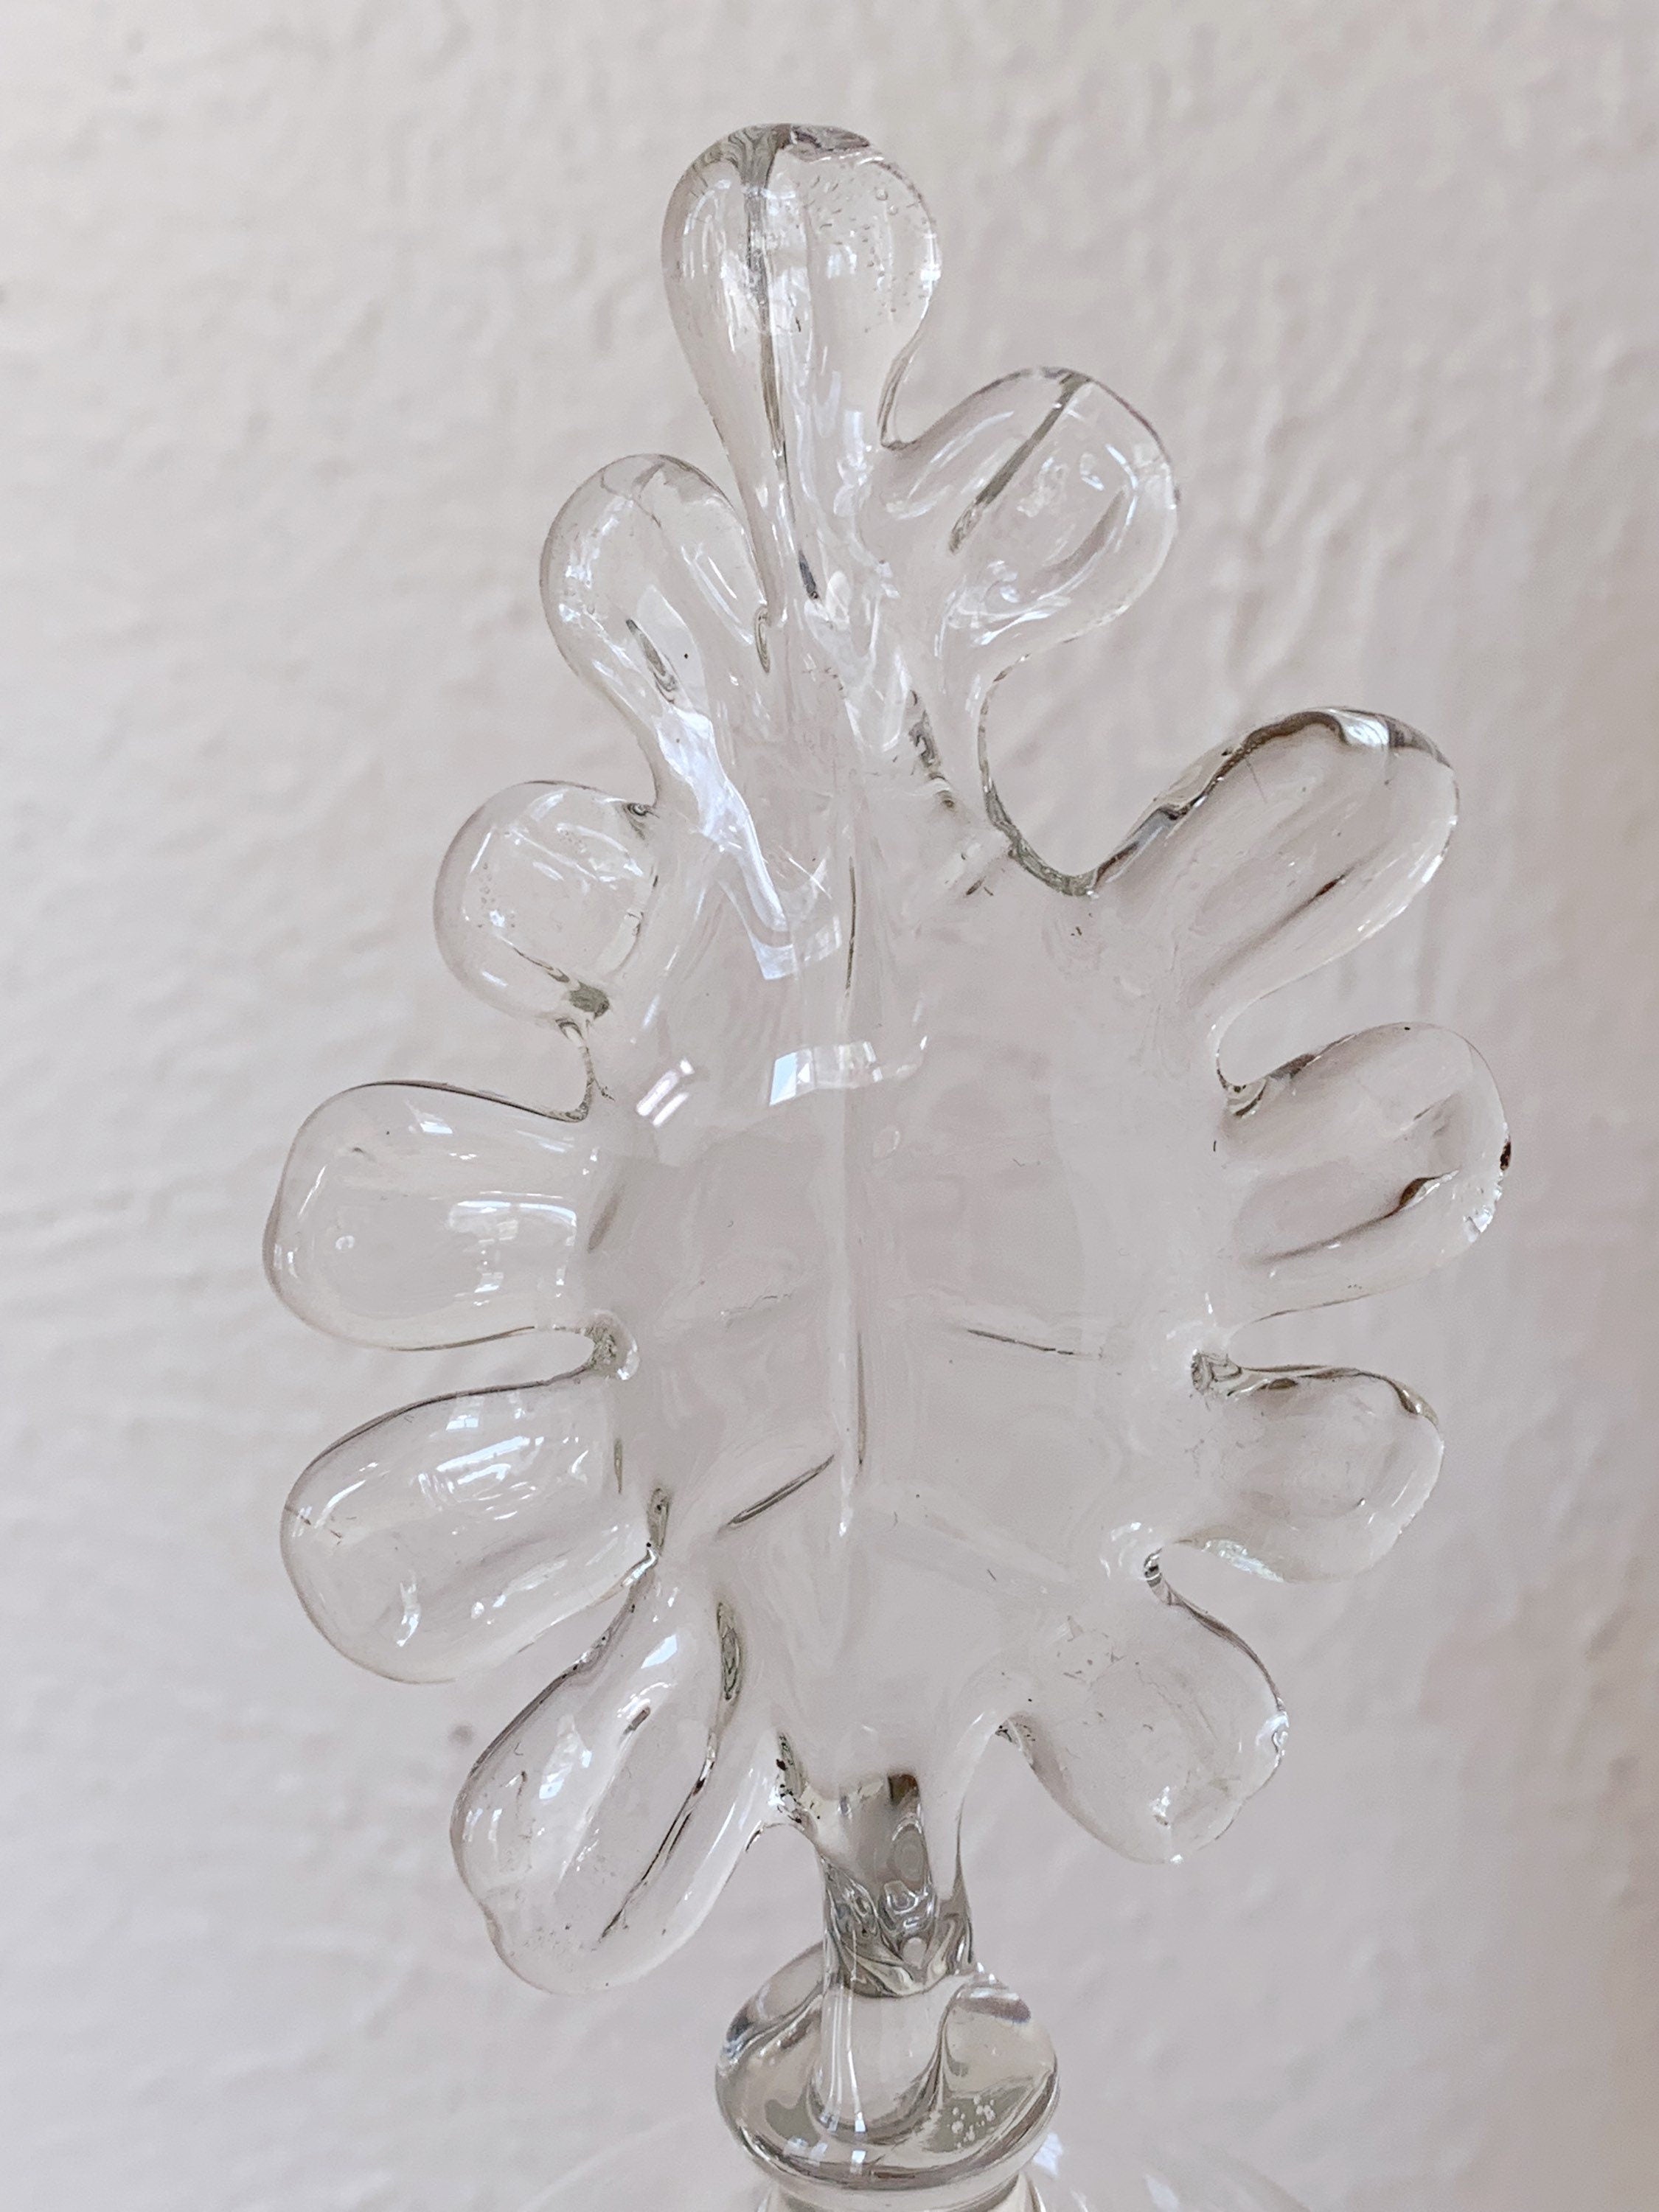 Large Vintage Artisan Hand Blown Clear Glass Decanter with Art Glass Leaf Stopper | Signed by Artist | 16" Tall Whiskey or Wine Decanter